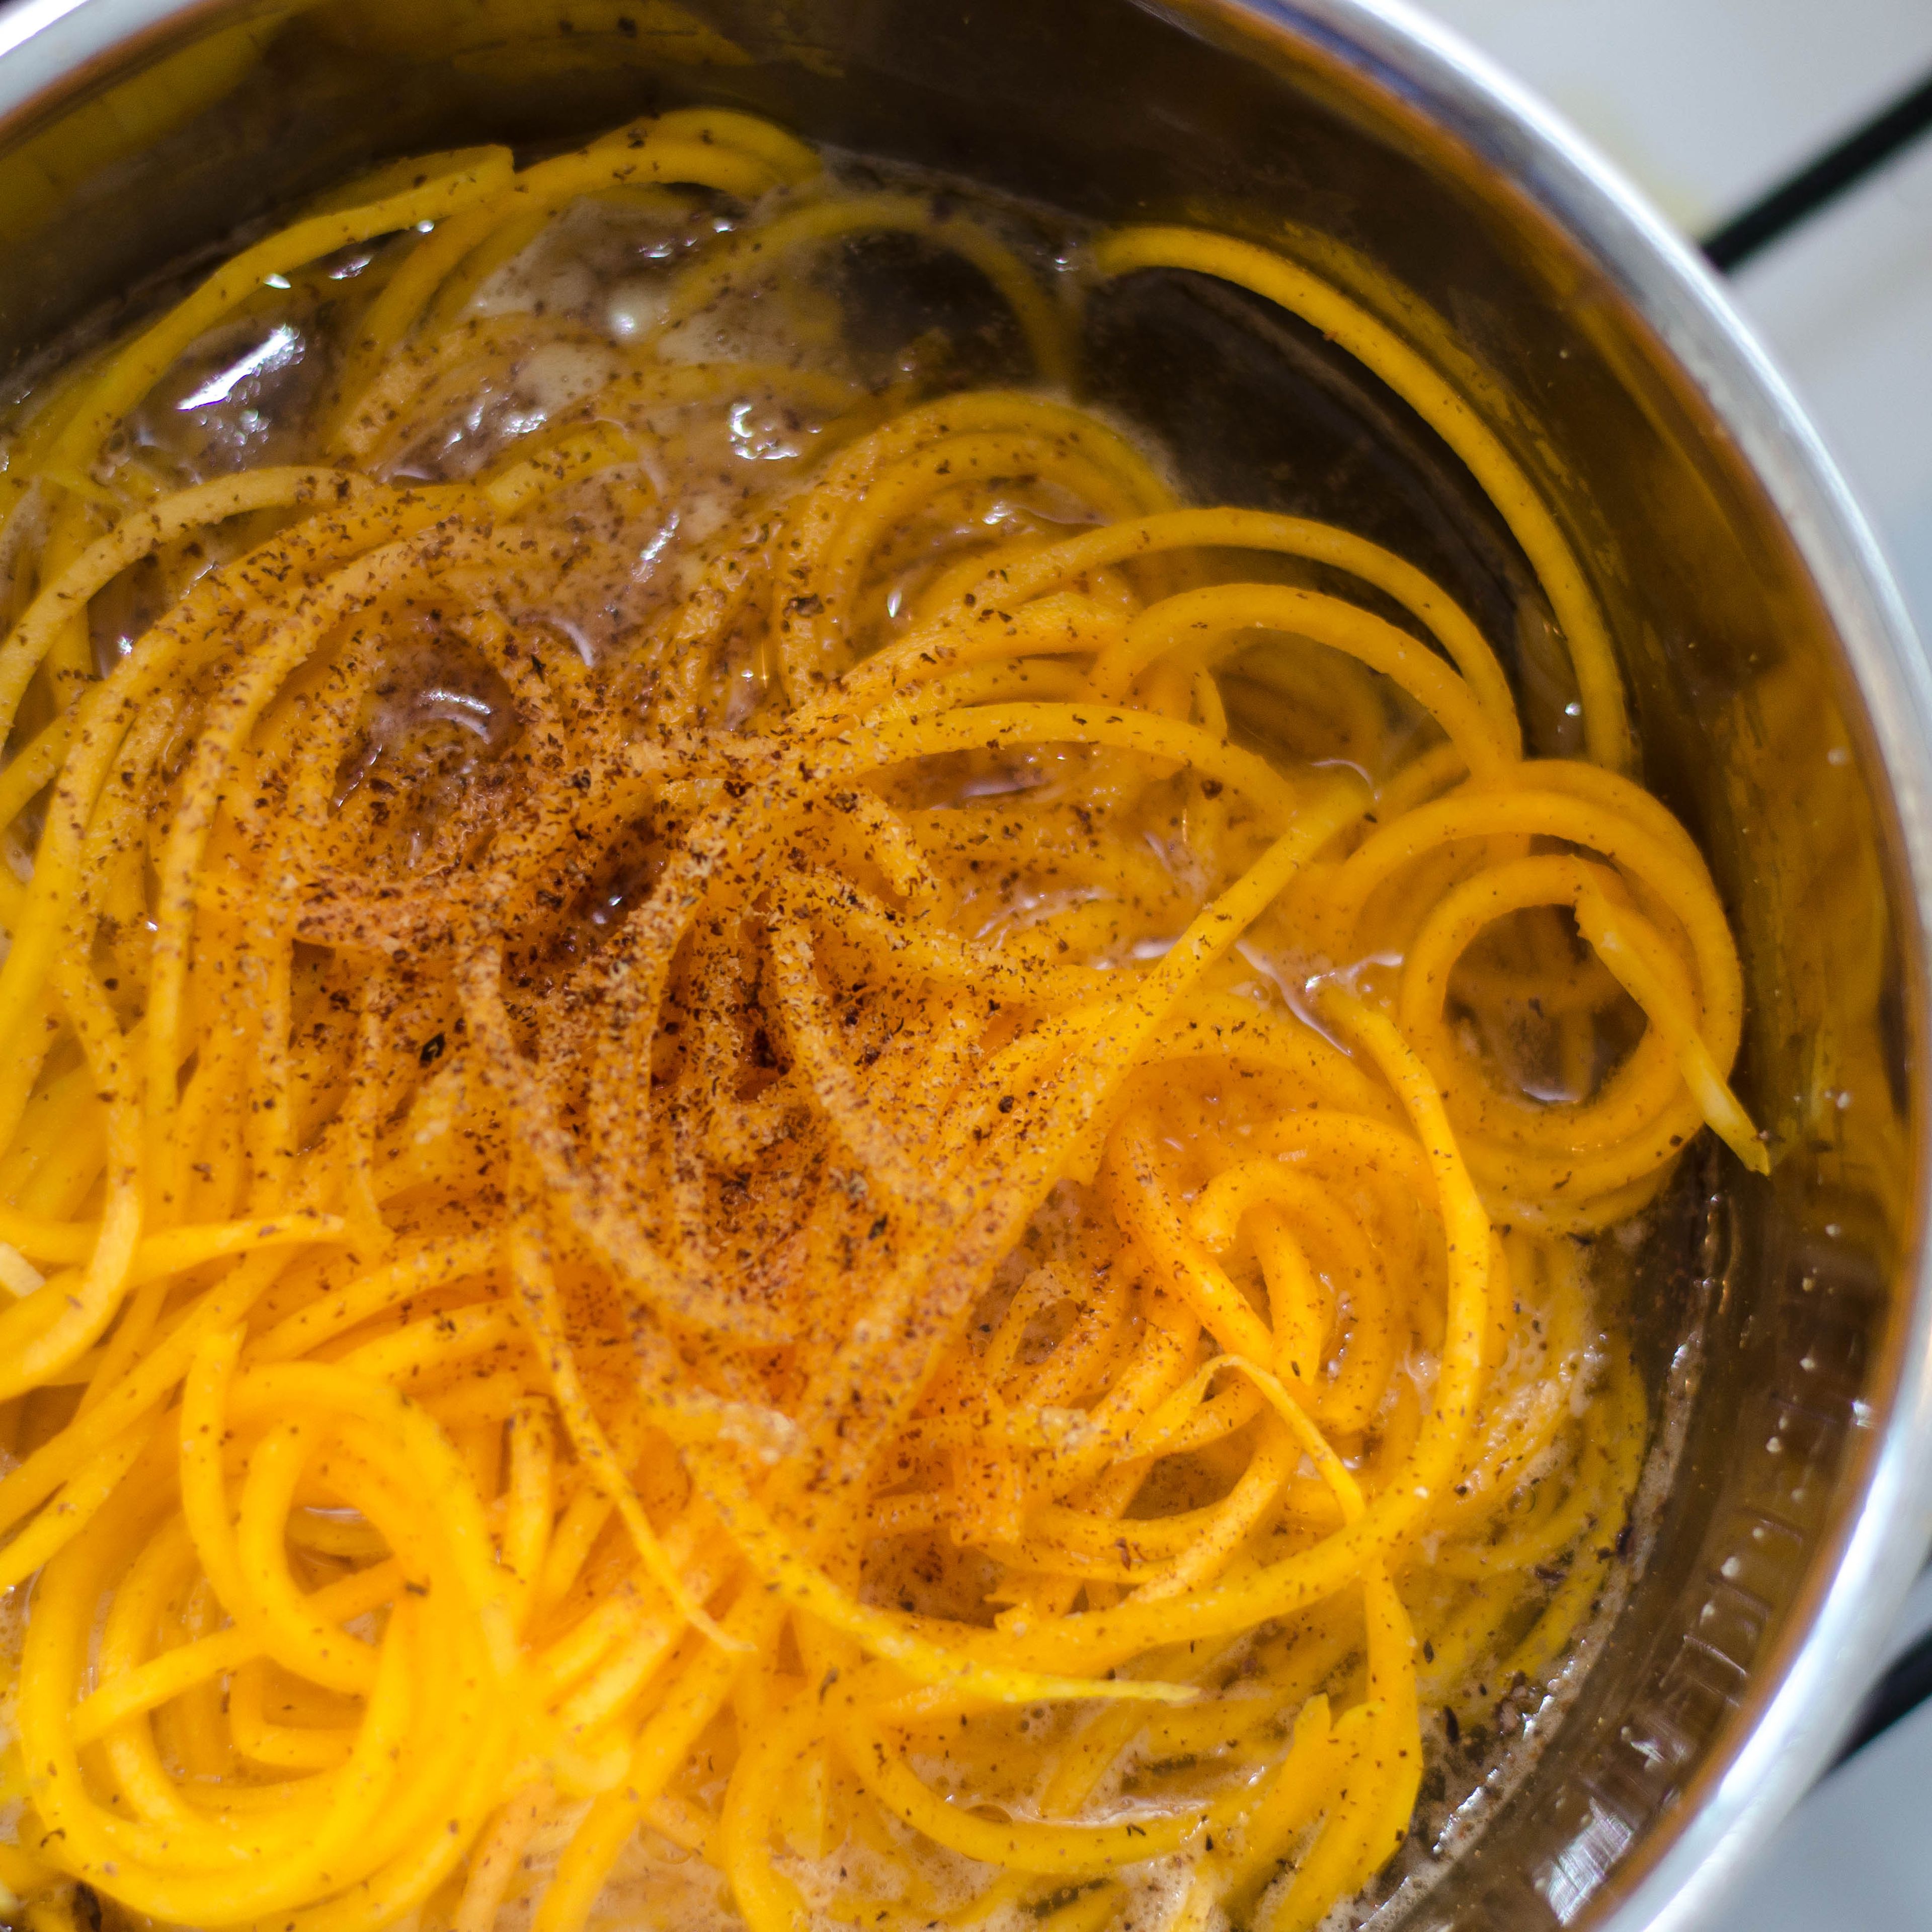 Bring a pot with water to a boil, add salt, and blanch butternut spaghetti for approx. 5 min. Meanwhile mix olive oil, soy sauce, agave syrup, and peanut butter in a bowl. Add minced garlic, sliced chili, salt, and pepper and whisk to combine. Add quinoa, butternut spaghetti, and leek to a serving bowl. Add the peanut-soy dressing and toss to combine. Serve immediately and enjoy!